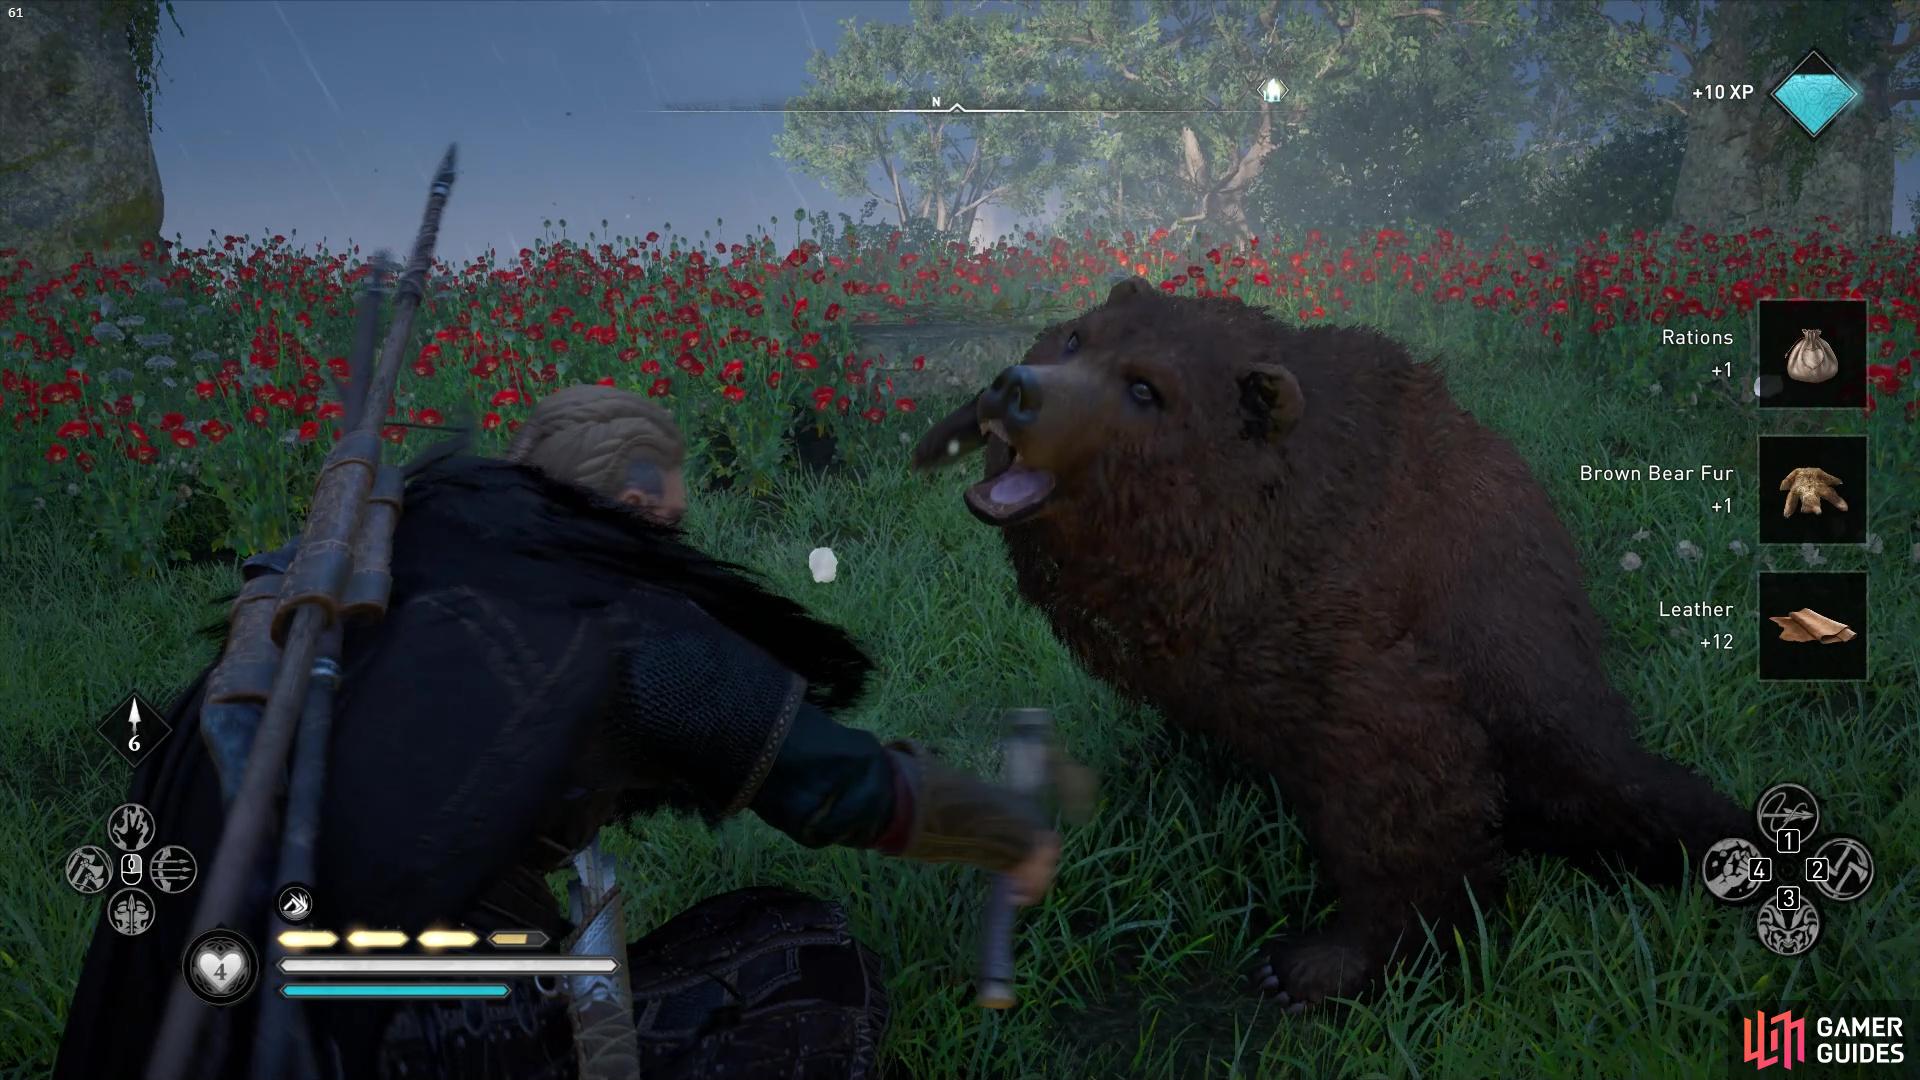 You'll first want to deal with the bear nearby. 